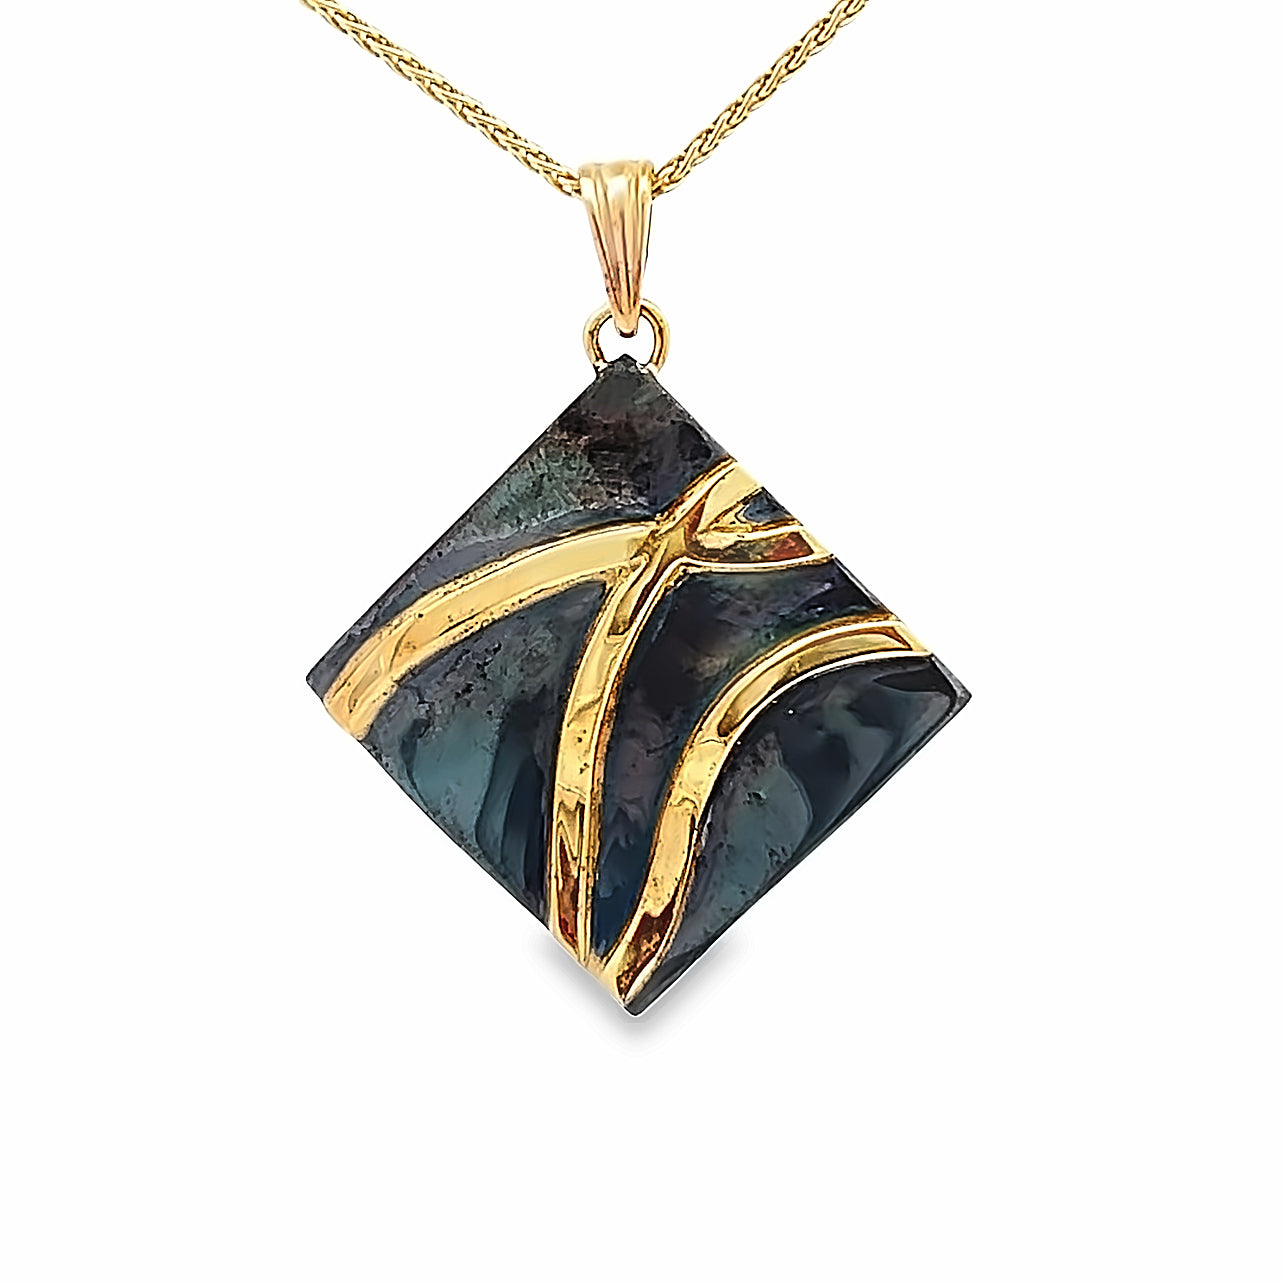 Oxidized Sterling Silver and 14k Yellow Gold Pathways Pendant by Paul Richter